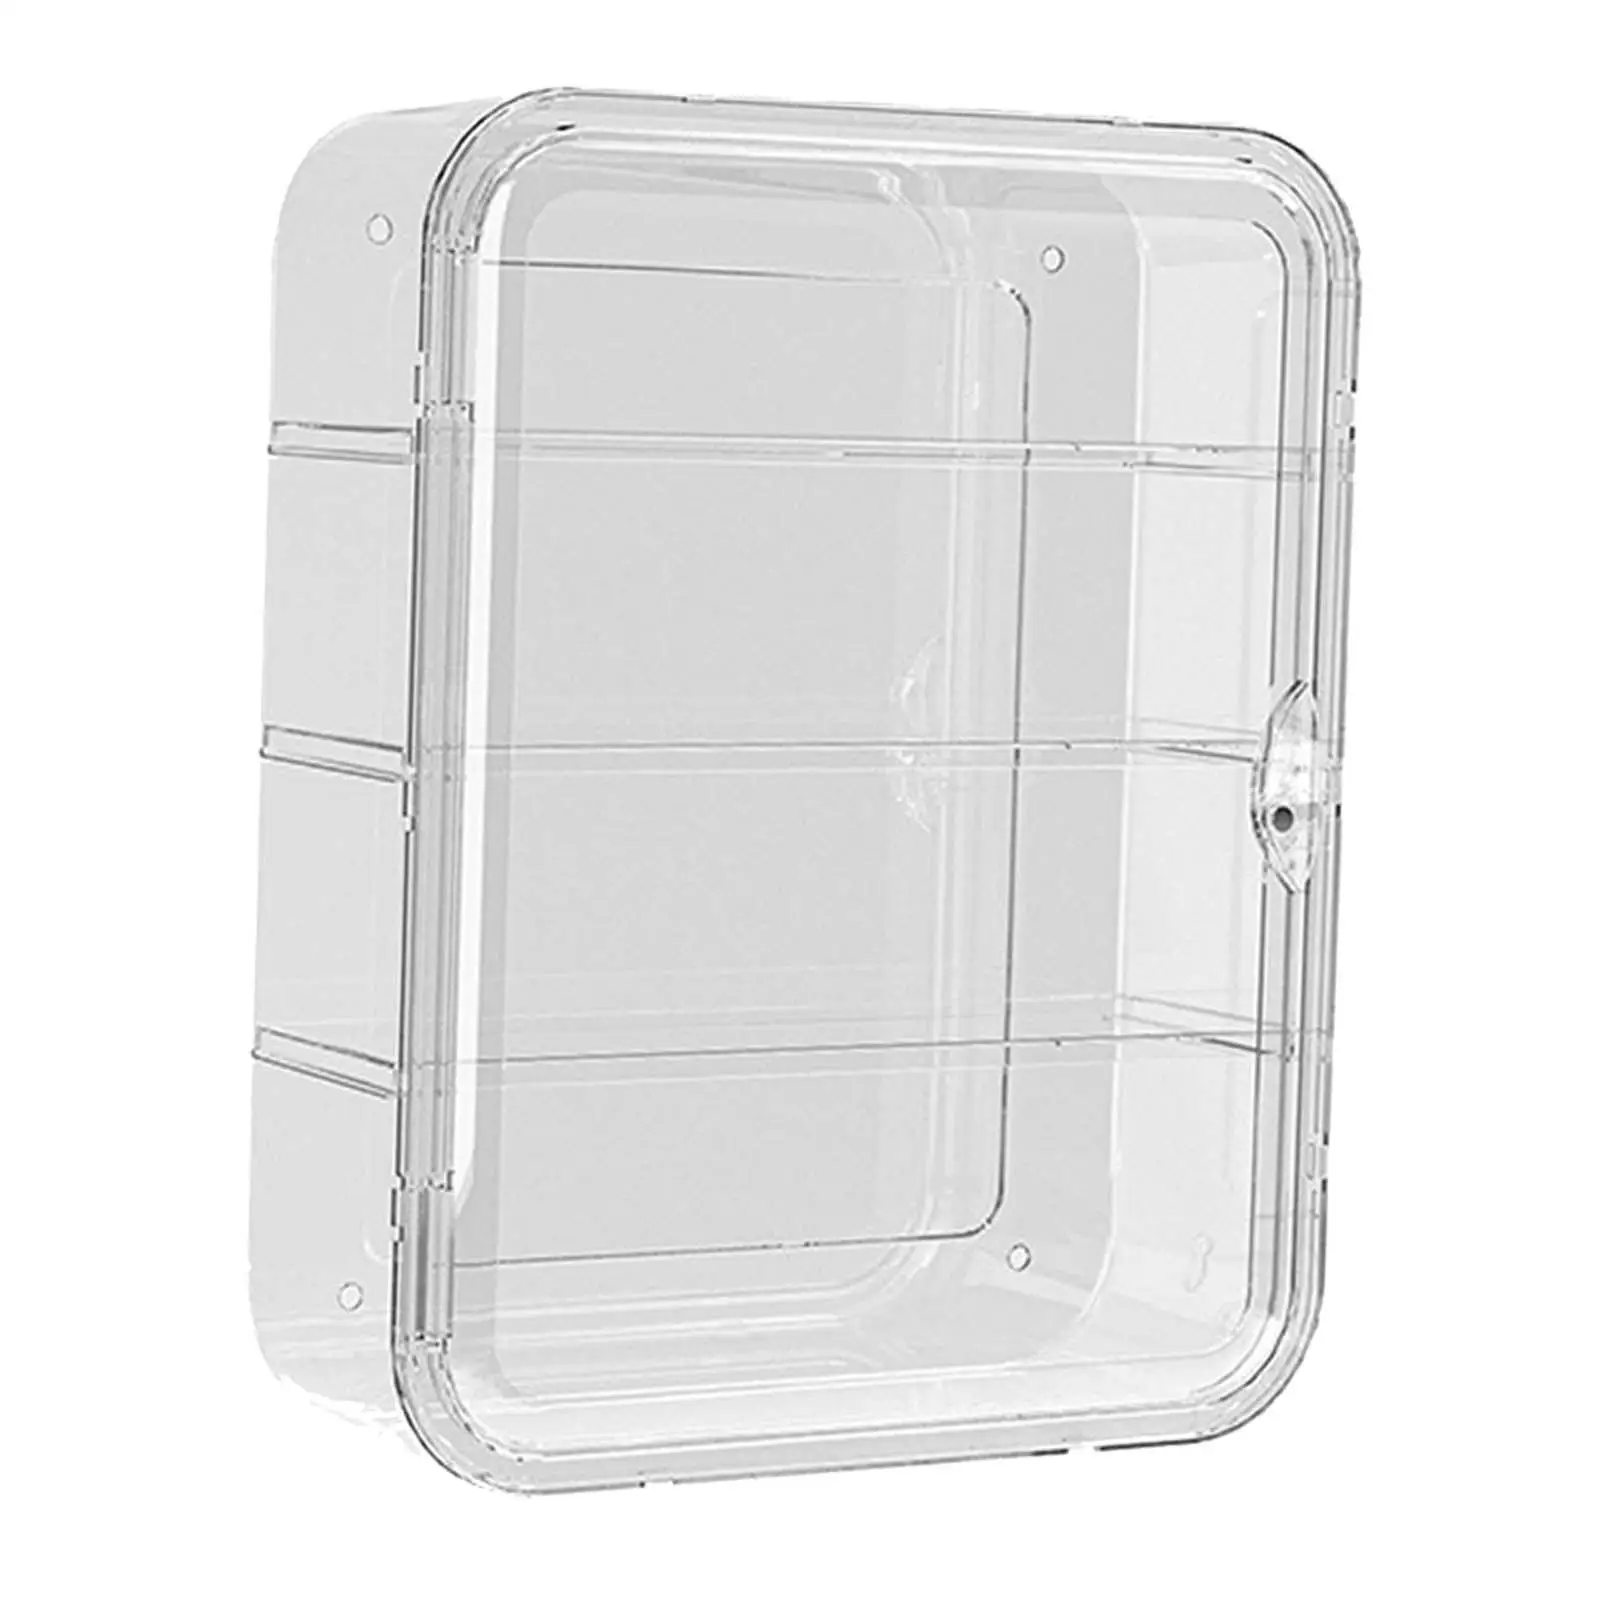 Clear Figurine Display Box Storage Box Wall Mount Showcase for Figurines Small Figures Toys Collectibles Stones Action Figures